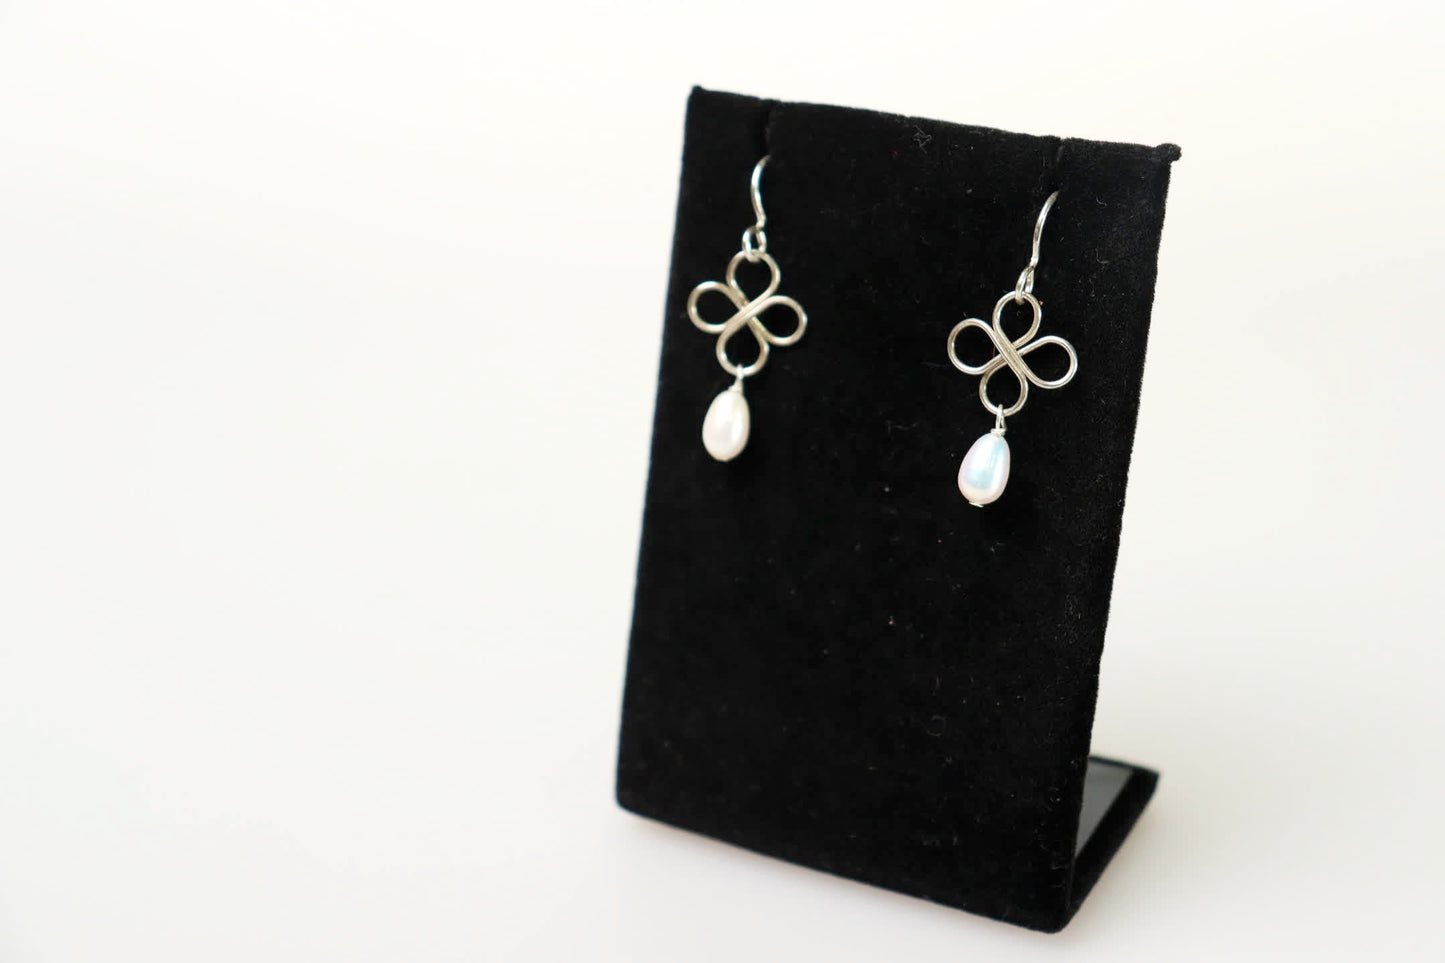 Clover Sterling Silver and Freshwater Pearl Earrings